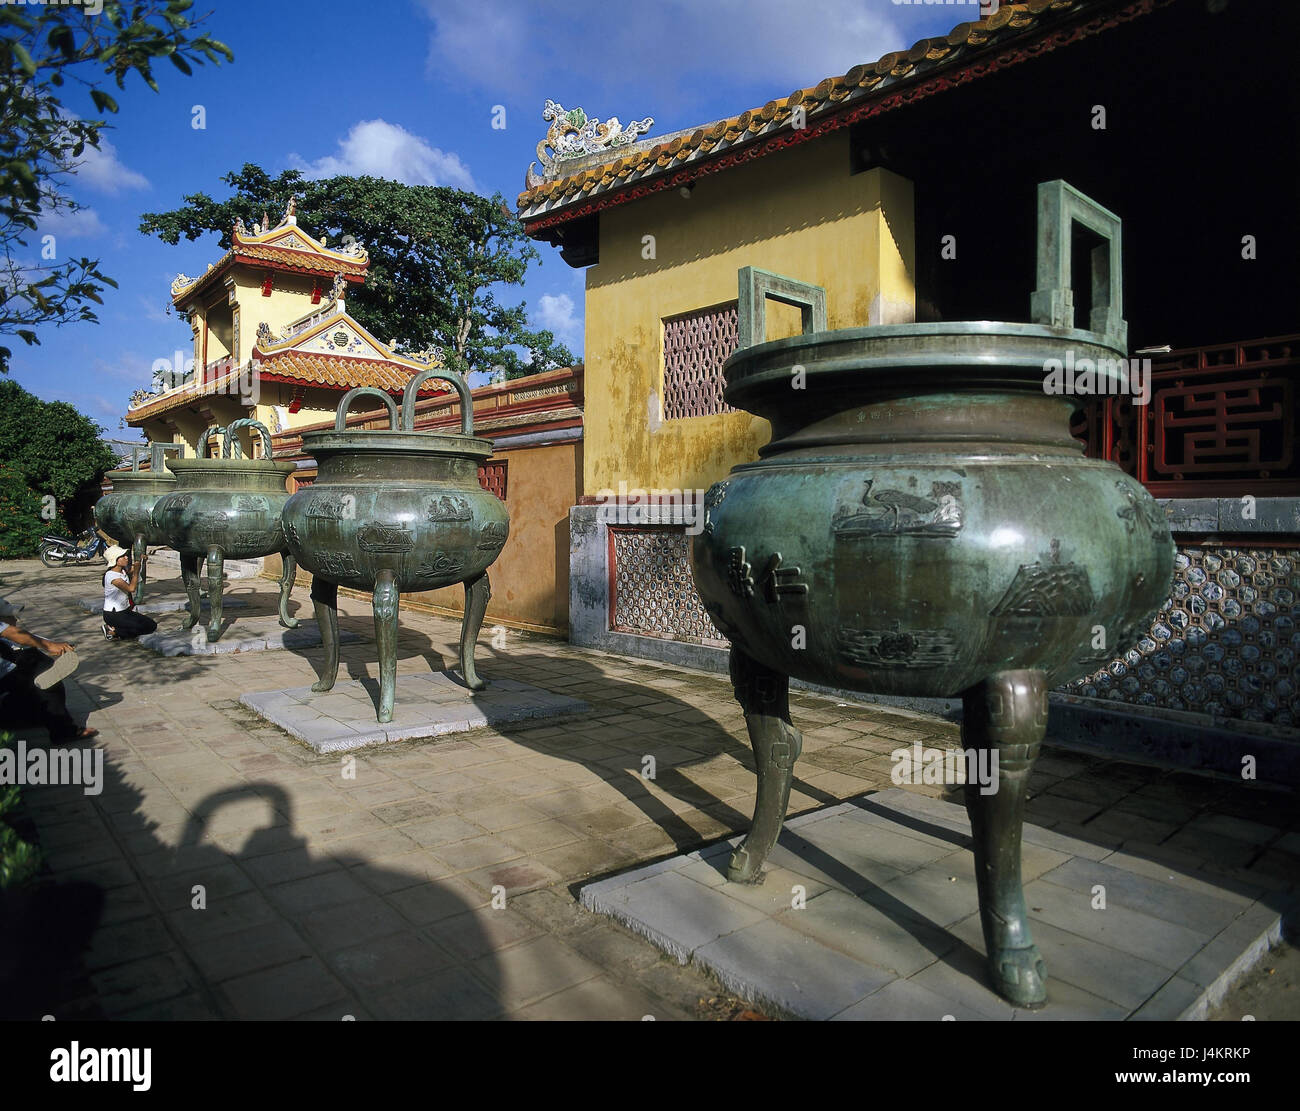 Vietnam, Gee up, Forbidden City, Nine dynasties urns outside, Asia, imperial city, place of interest, forbidden violet town, University of Technology of Cam Thanh, bronze urns, faith, monument, 'Nine countries, nine emperors', culture Stock Photo